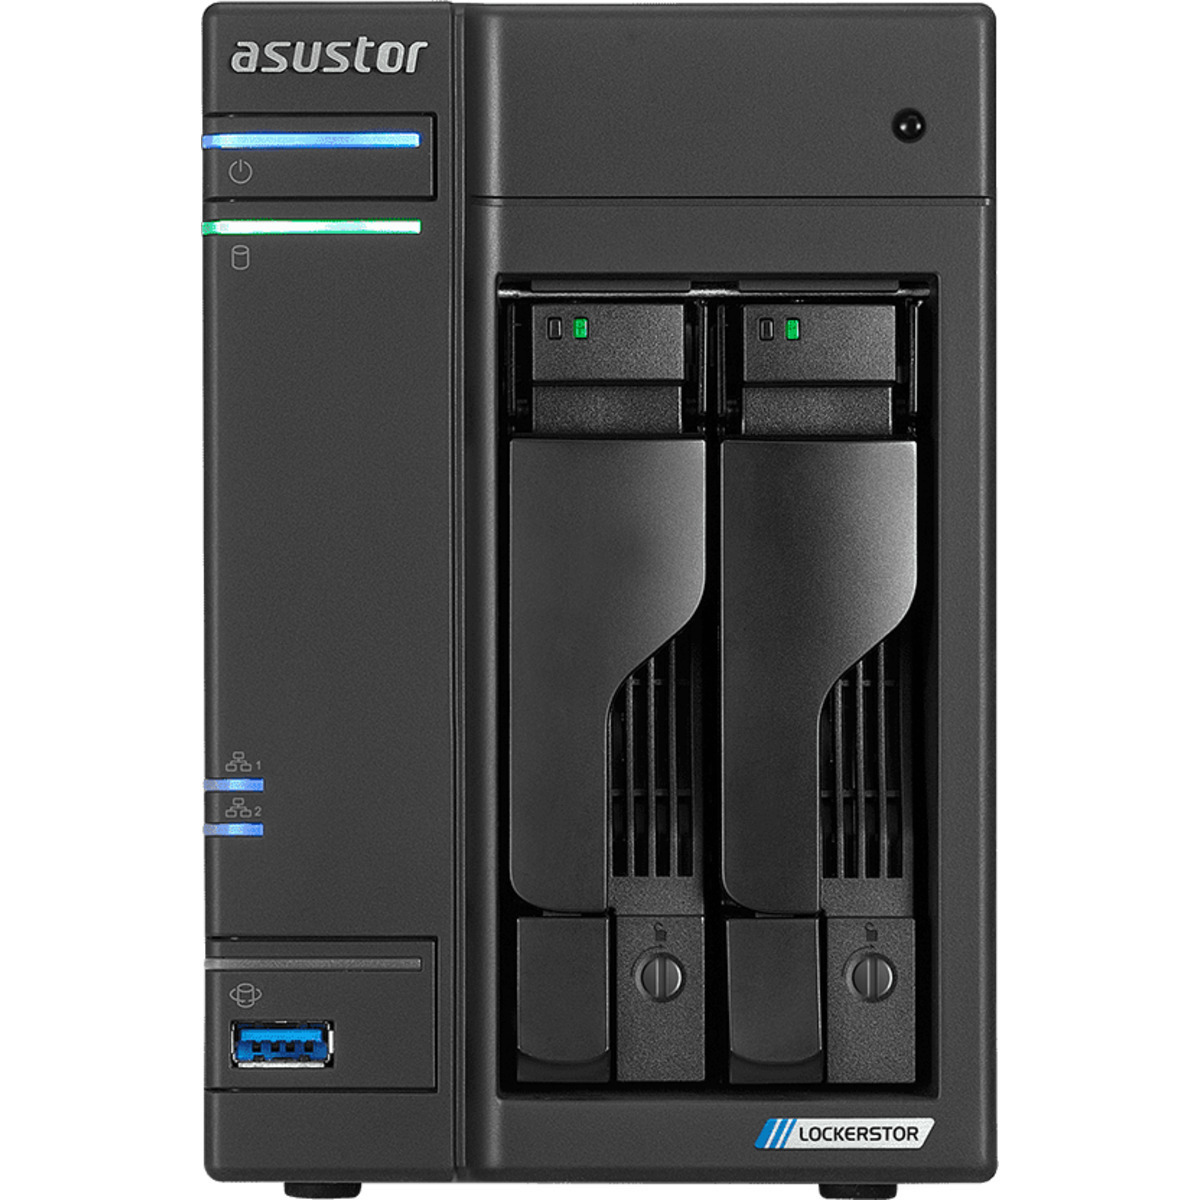 ASUSTOR AS6602T Lockerstor 2 22tb 2-Bay Desktop Multimedia / Power User / Business NAS - Network Attached Storage Device 1x22tb Western Digital Ultrastar HC580 WUH722422ALE6L4 3.5 7200rpm SATA 6Gb/s HDD ENTERPRISE Class Drives Installed - Burn-In Tested - FREE RAM UPGRADE AS6602T Lockerstor 2